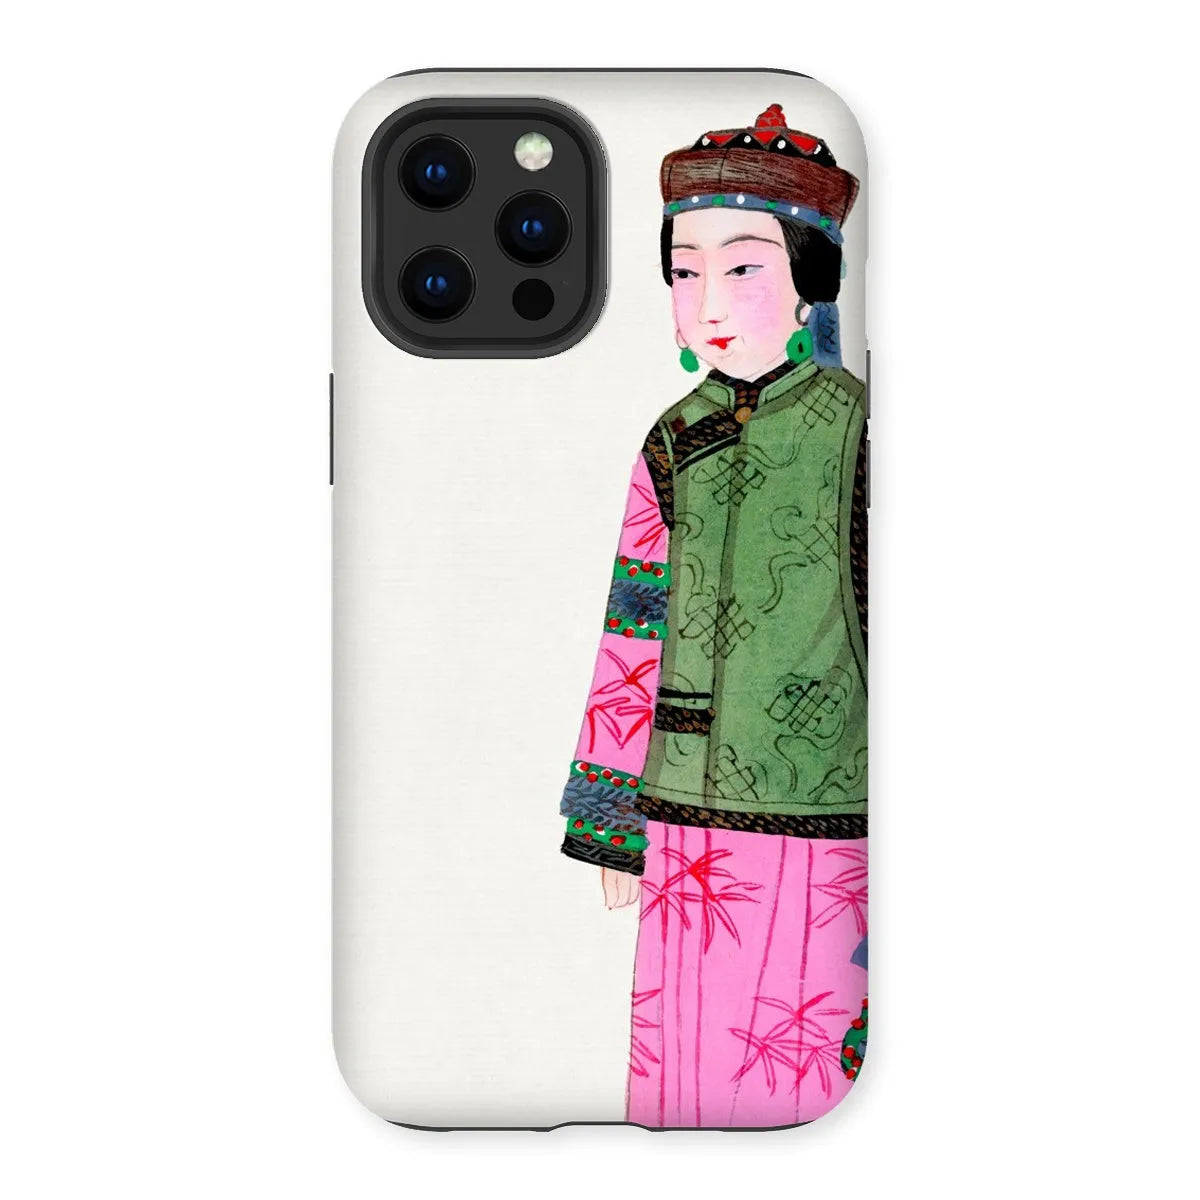 Noblewoman In Winter - Chinese Aesthetic Art Phone Case - Iphone 12 Pro Max / Matte - Mobile Phone Cases - Aesthetic Art